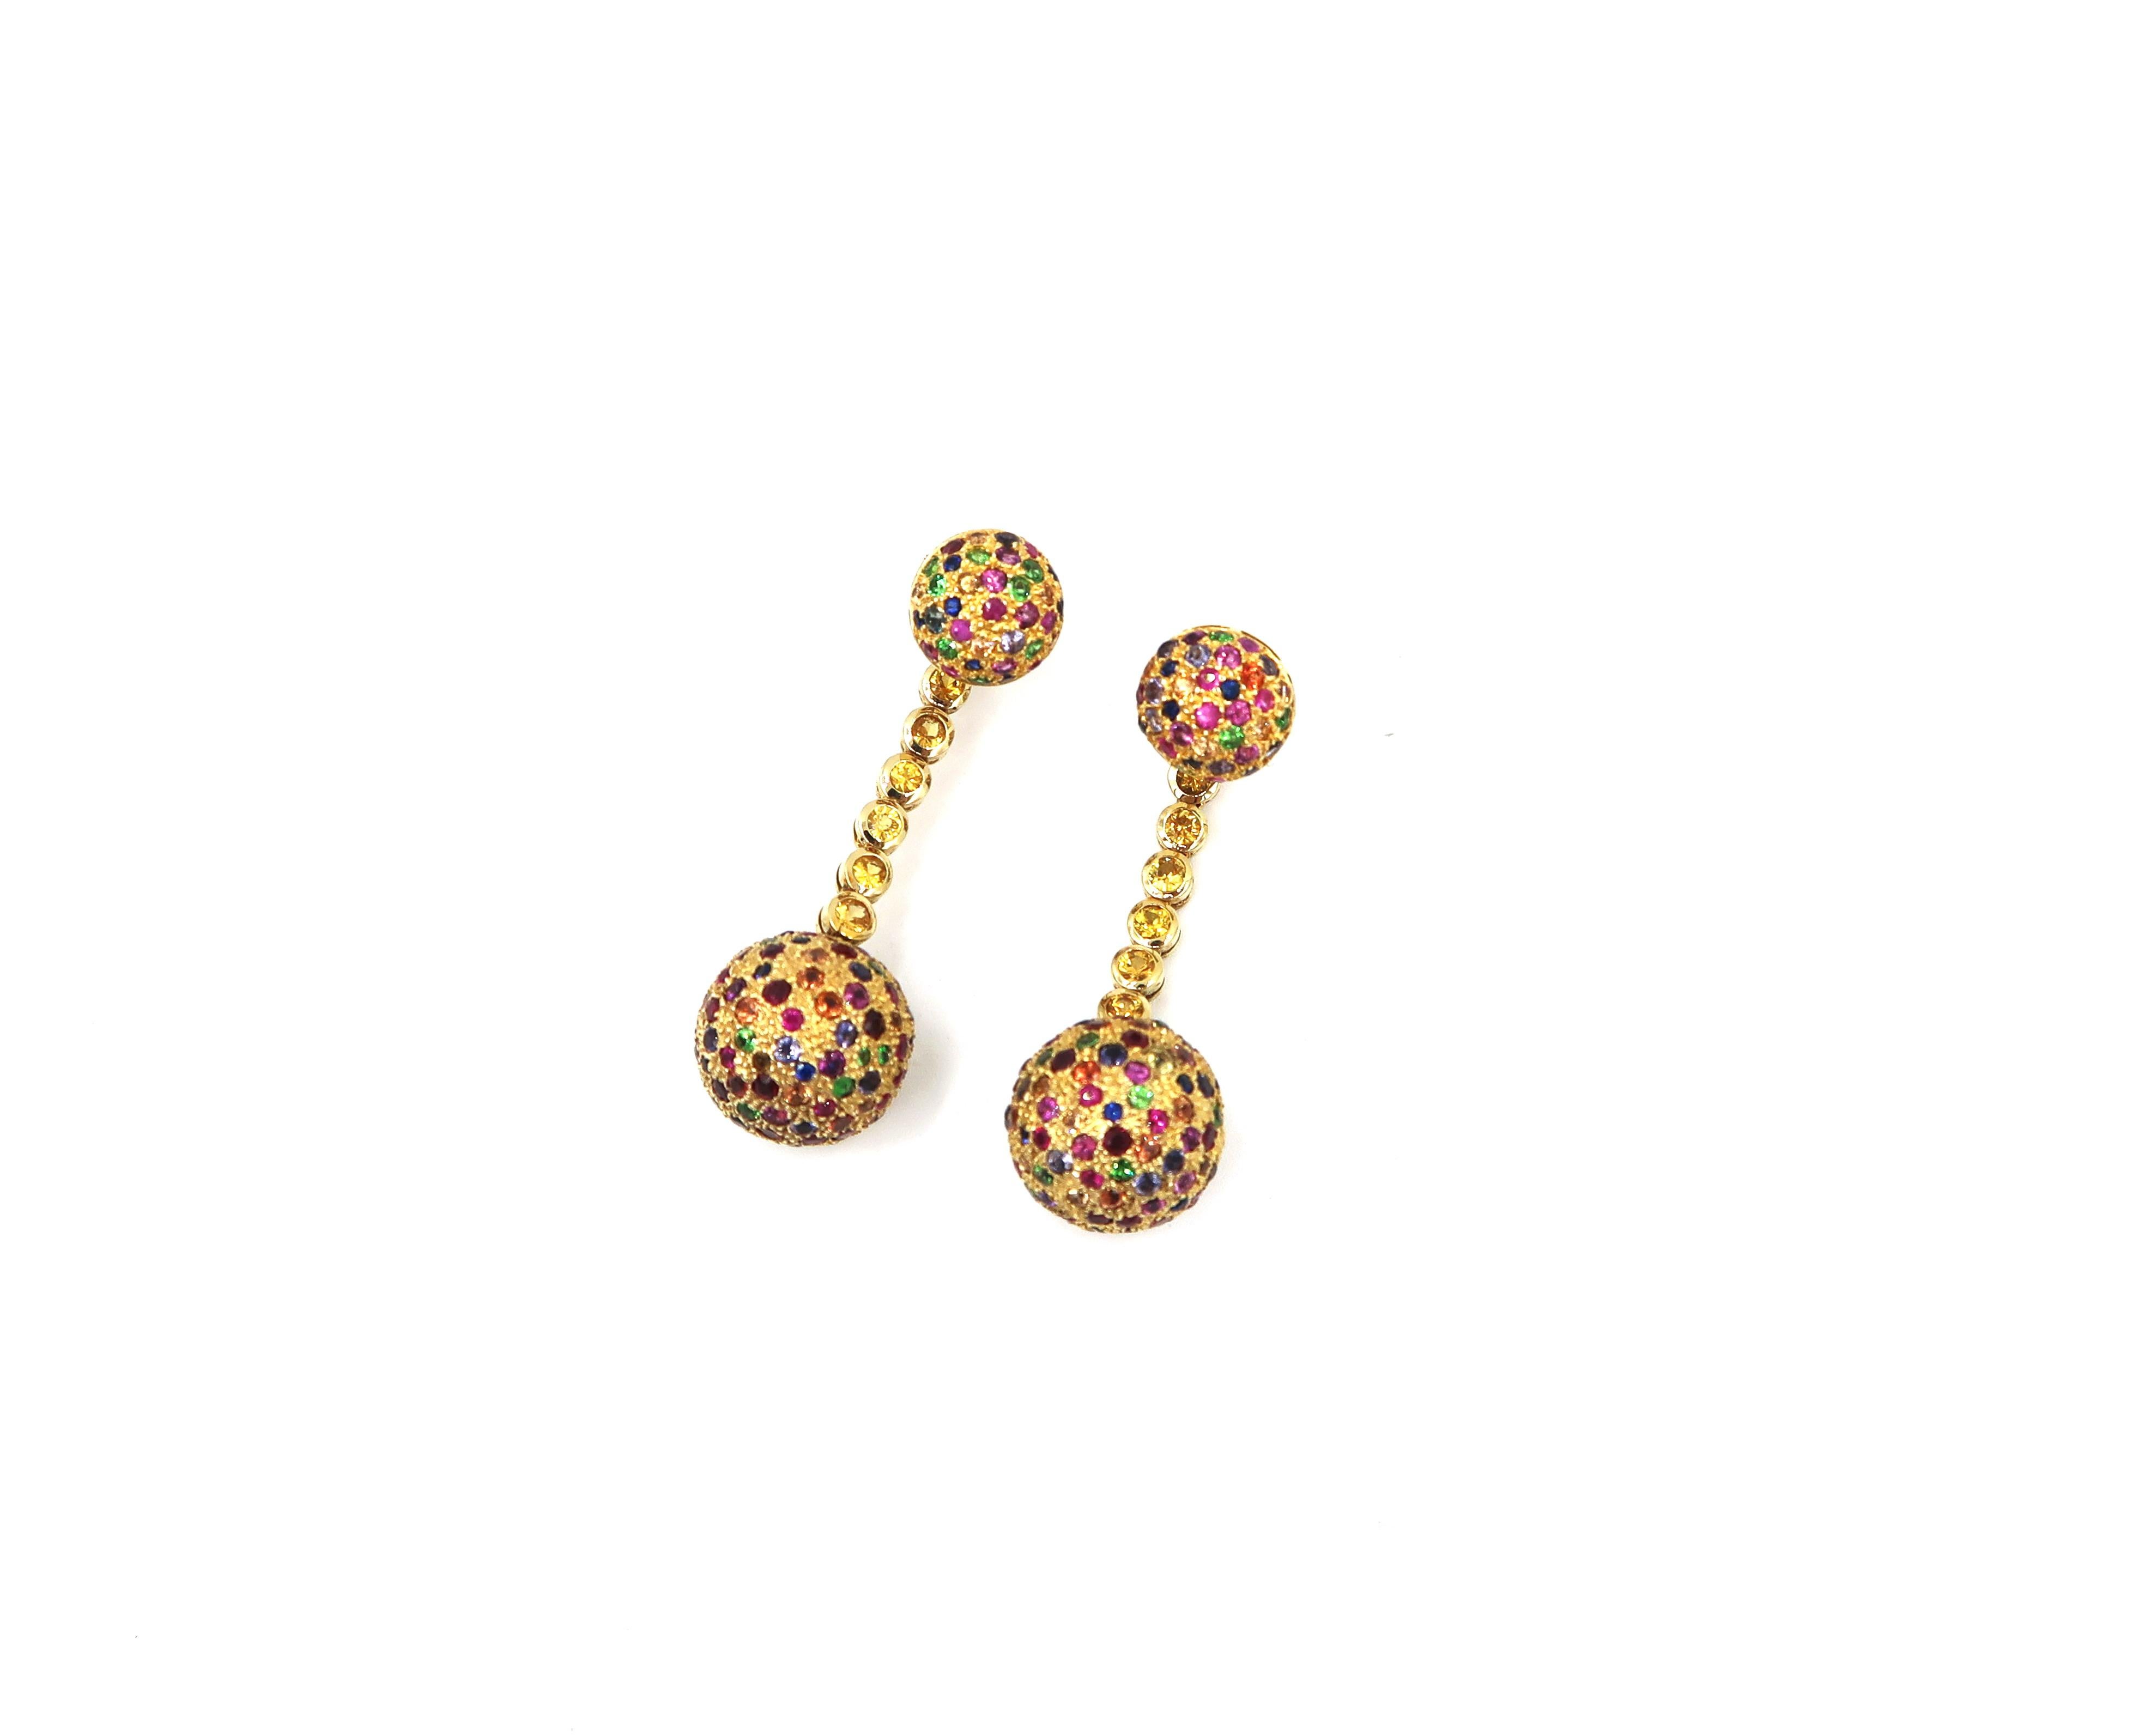 Multi Colour Gems Dangle Earrings in 18K Yellow Gold with Detachable Hanging Drops

The earrings can be worn as studs too. 

Gold : 18K Yellow Gold 19.316g.
Colour Gems : 7.48cts.
Yellow Sapphire : 0.93ct.